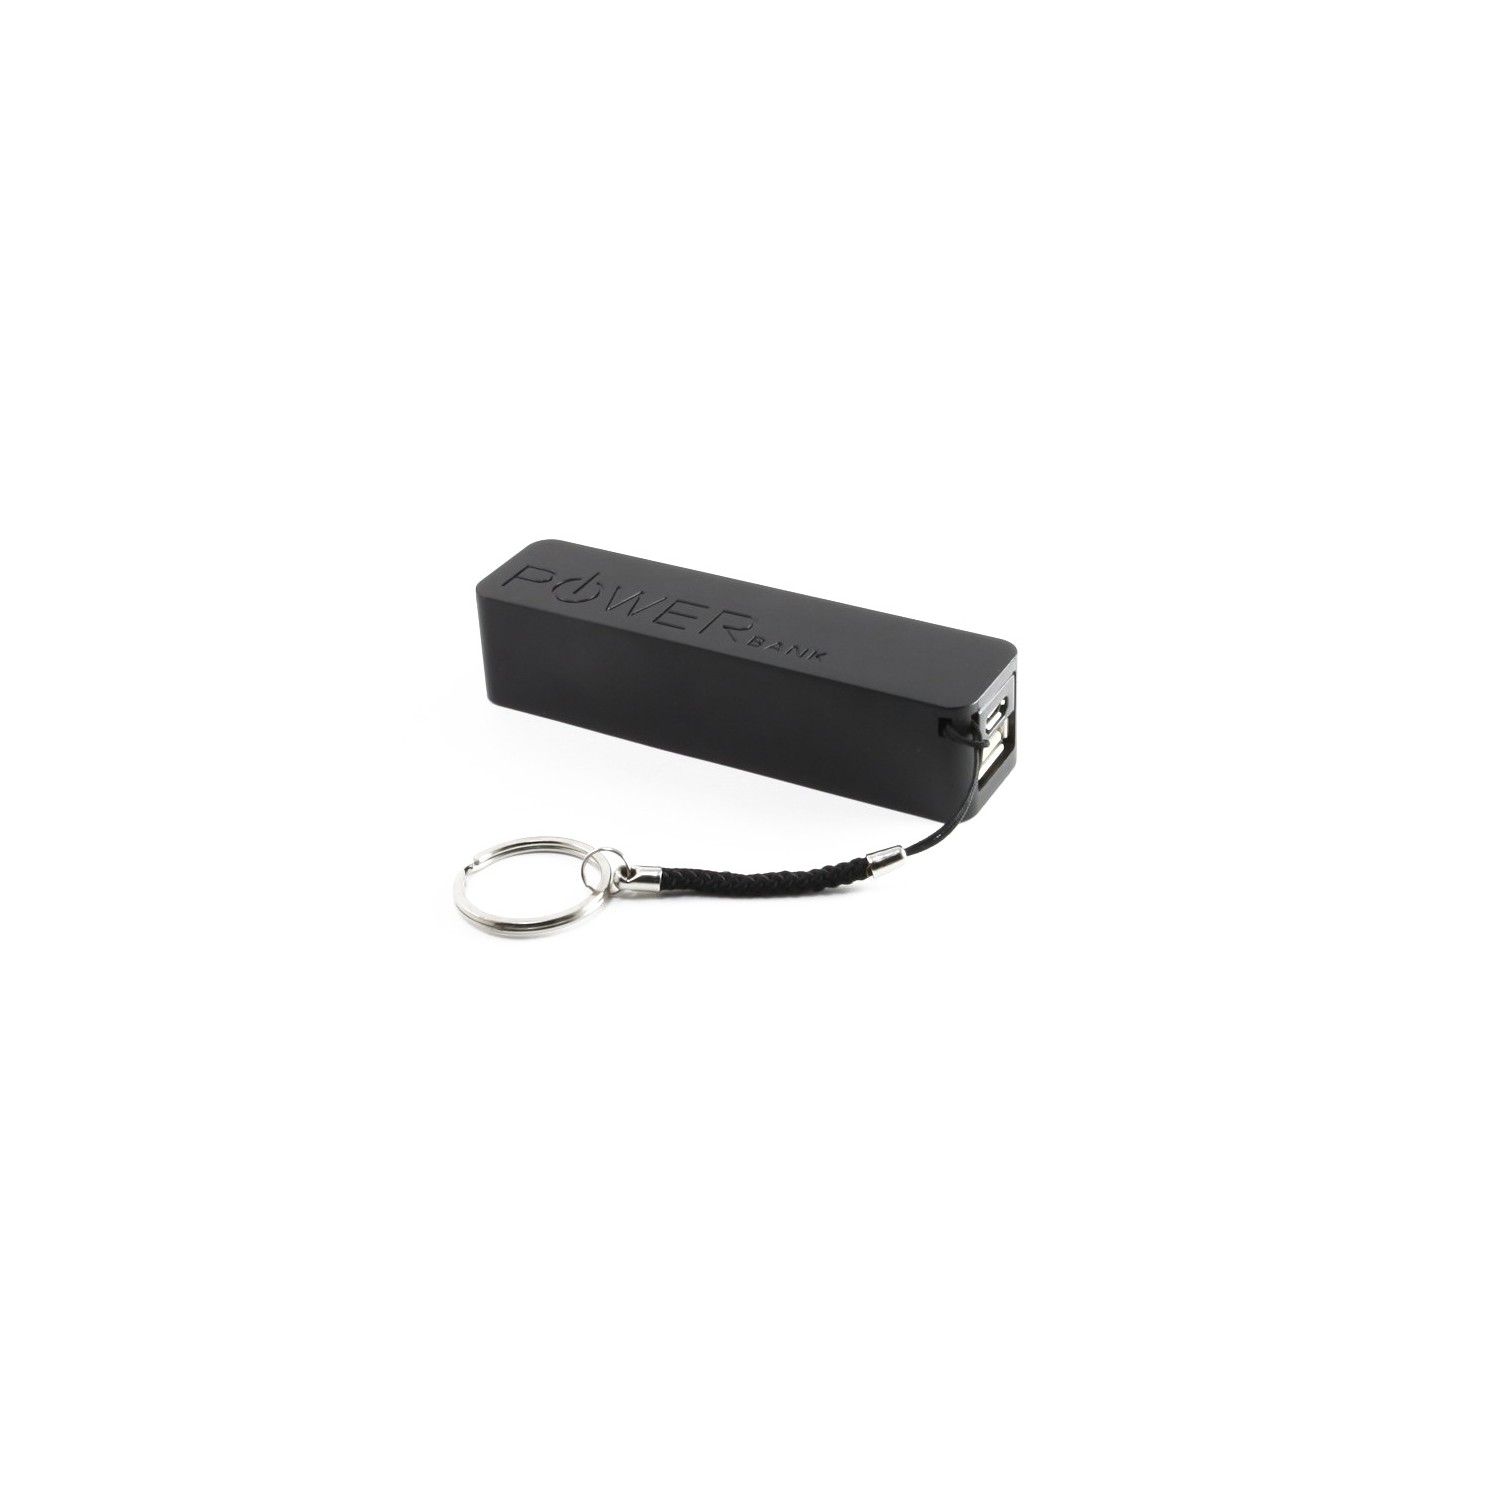 axGear Mini Backup External Battery 2600mAh Portable USB Power Bank with Cable Charger - Black